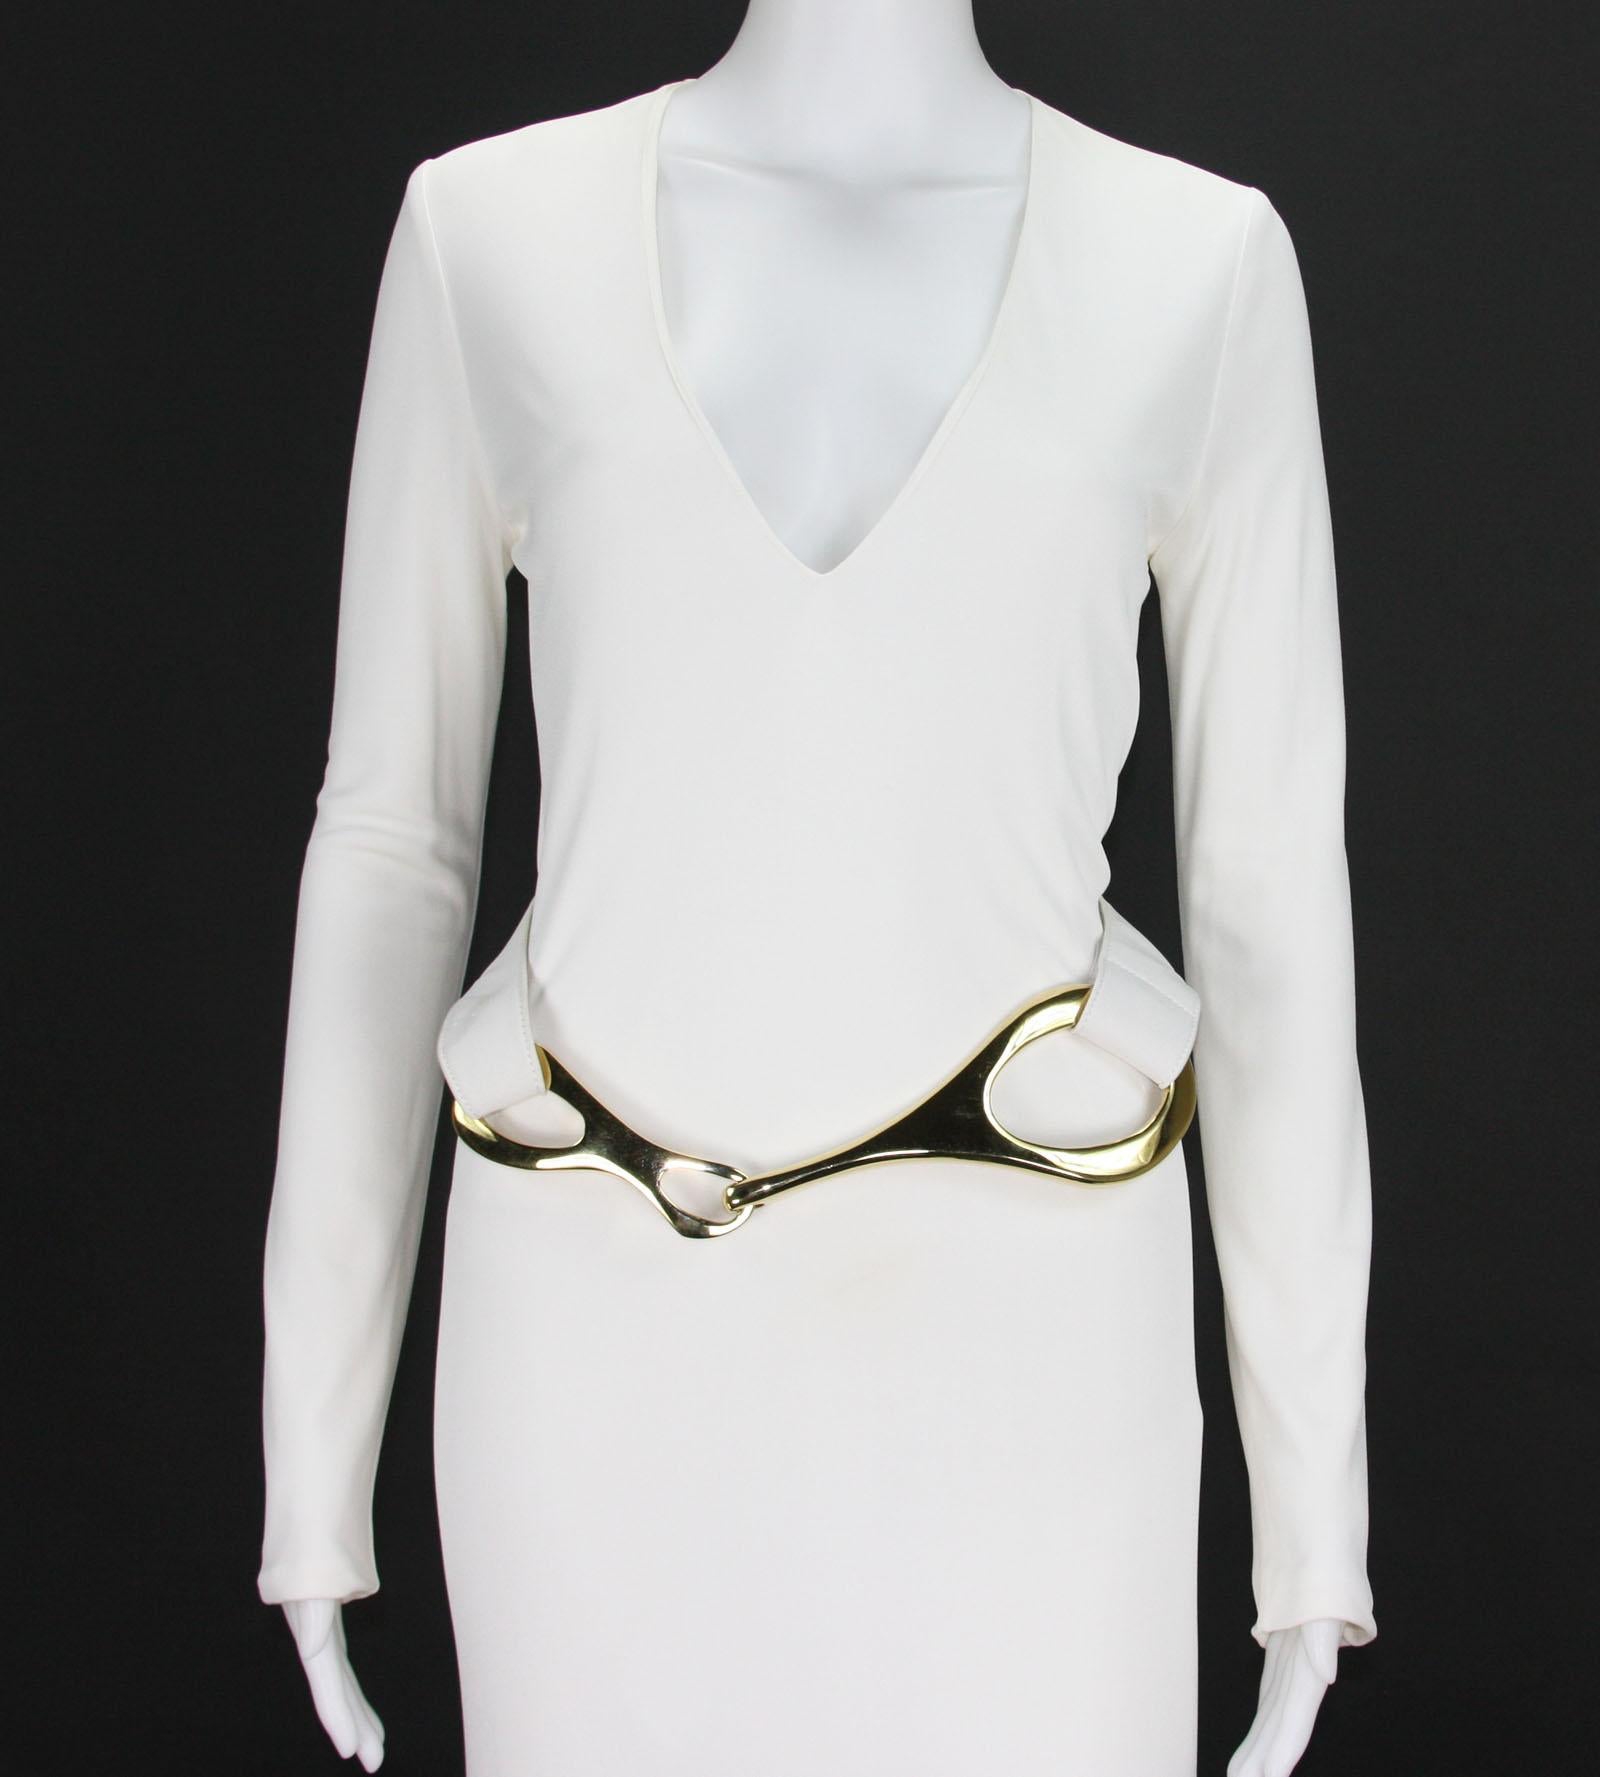 Women's Museum Tom Ford for Gucci F/W 1996 Collection White Jersey Belted Dress Gown 38 